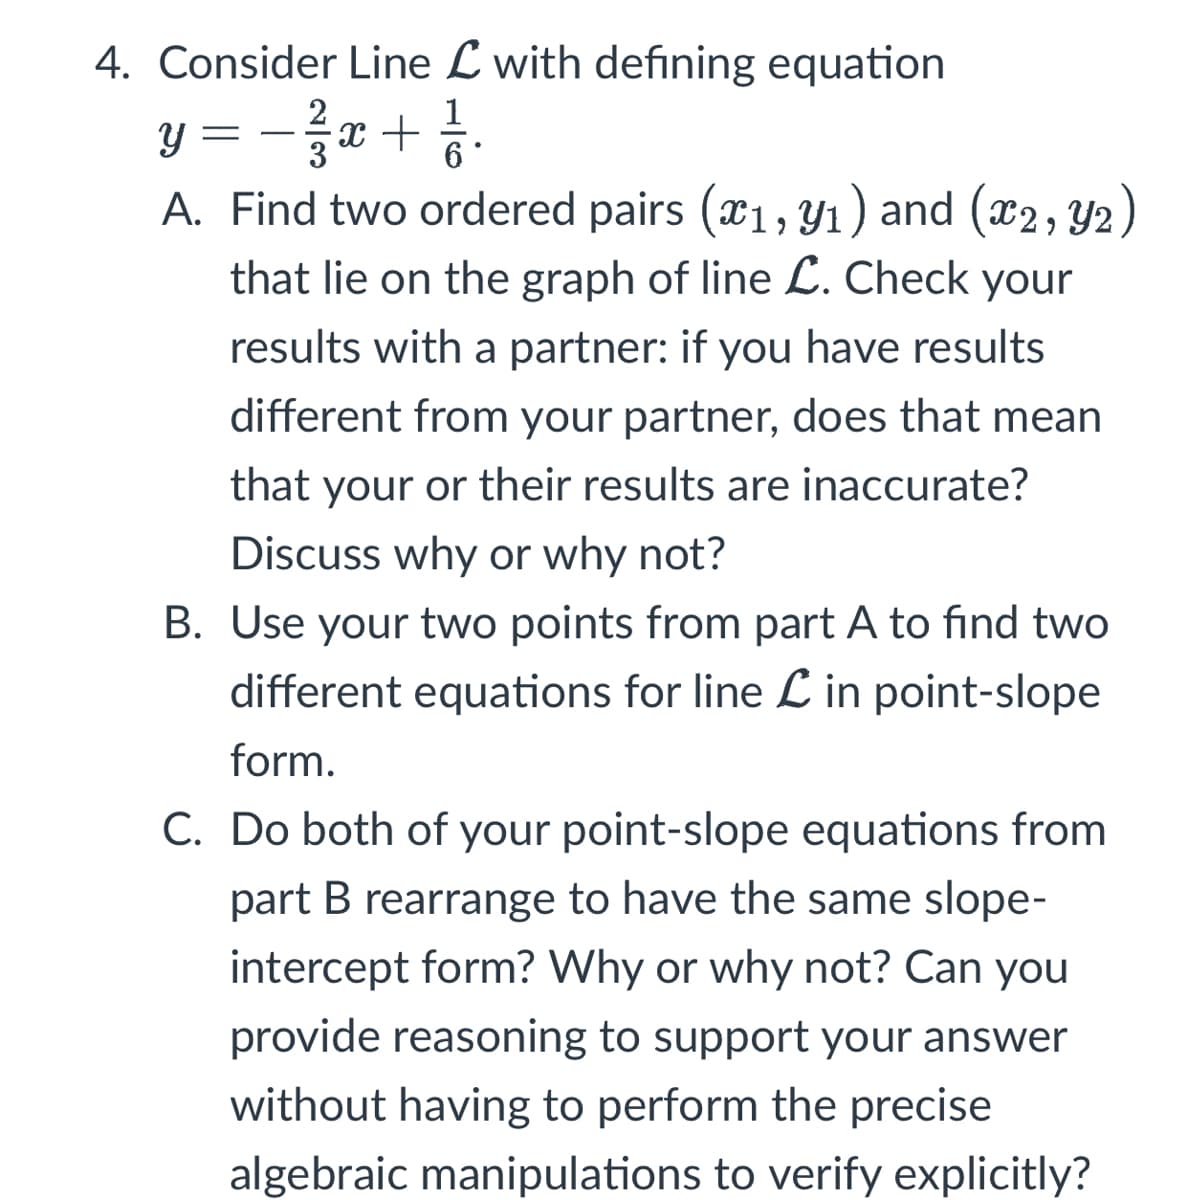 4. Consider Line L with defining equation
2
y − 3²/37x + ²1/12.
=
A. Find two ordered pairs (x₁, y₁) and (x2, Y2)
that lie on the graph of line L. Check your
results with a partner: if you have results
different from your partner, does that mean
that your or their results are inaccurate?
Discuss why or why not?
B. Use your two points from part A to find two
different equations for line in point-slope
form.
C. Do both of your point-slope equations from
part B rearrange to have the same slope-
intercept form? Why or why not? Can you
provide reasoning to support your answer
without having to perform the precise
algebraic manipulations to verify explicitly?